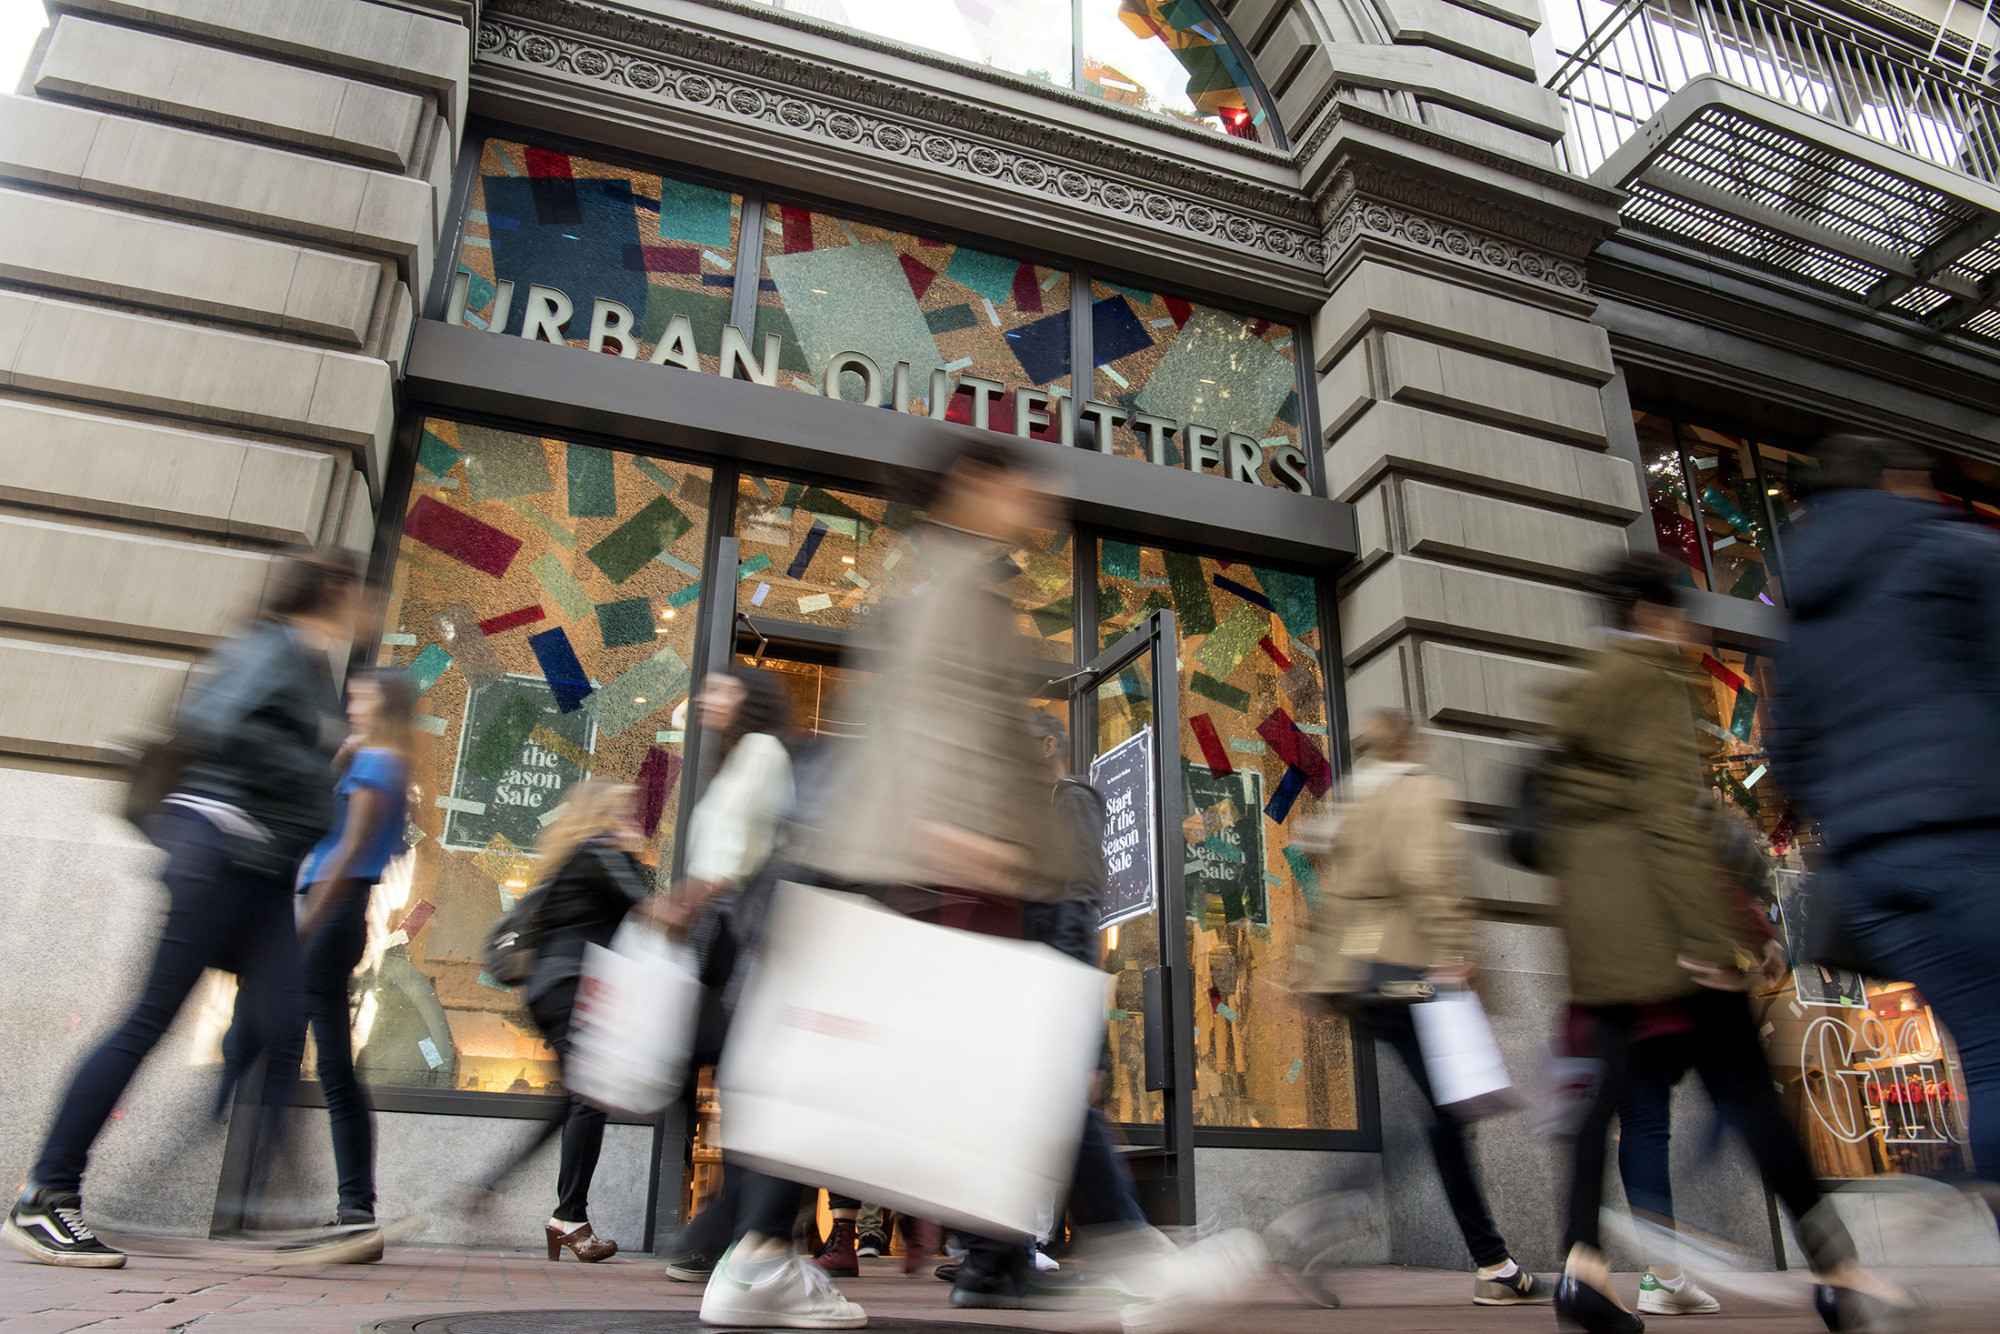 An Urban Outfitters Inc. store in San Francisco.
